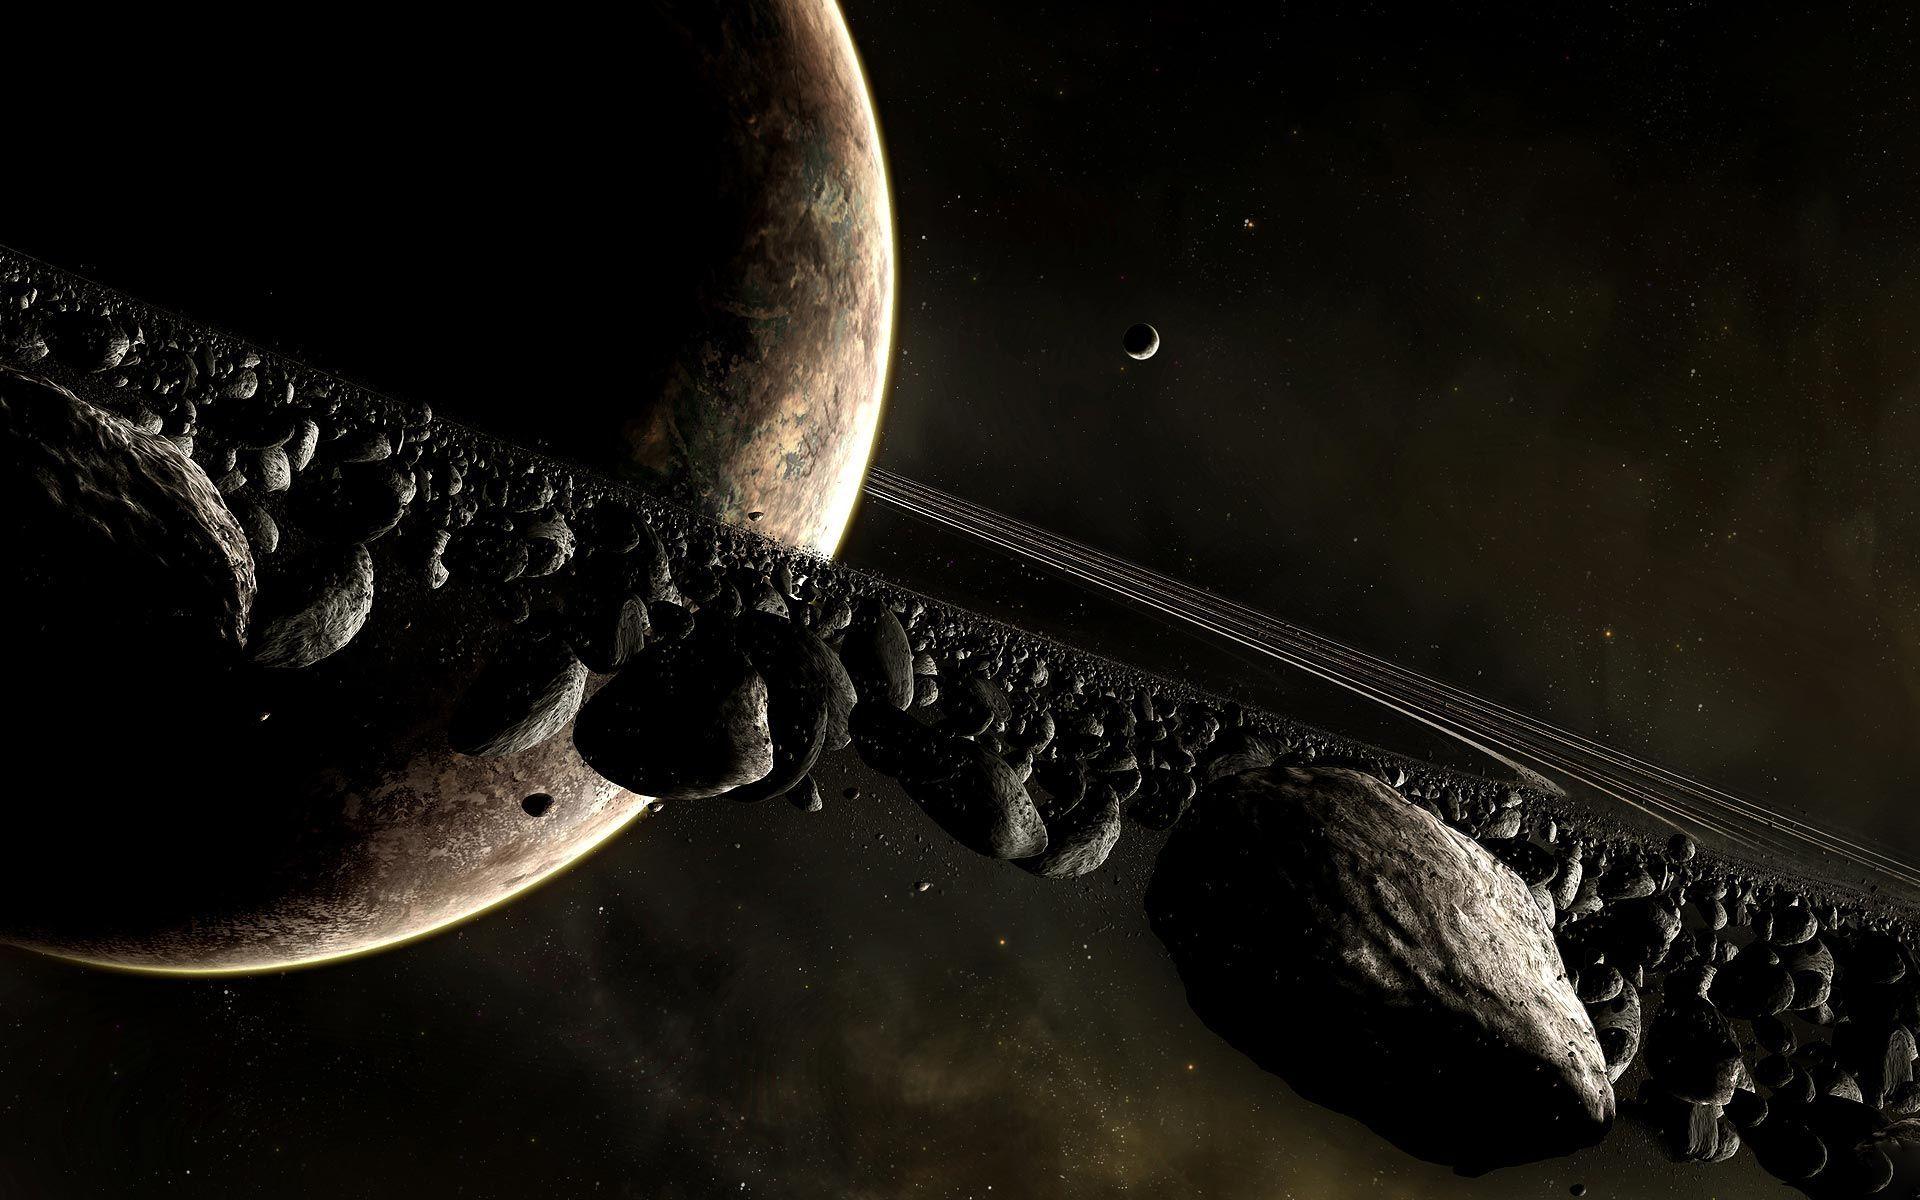 A space ship is flying through the galaxy - Saturn